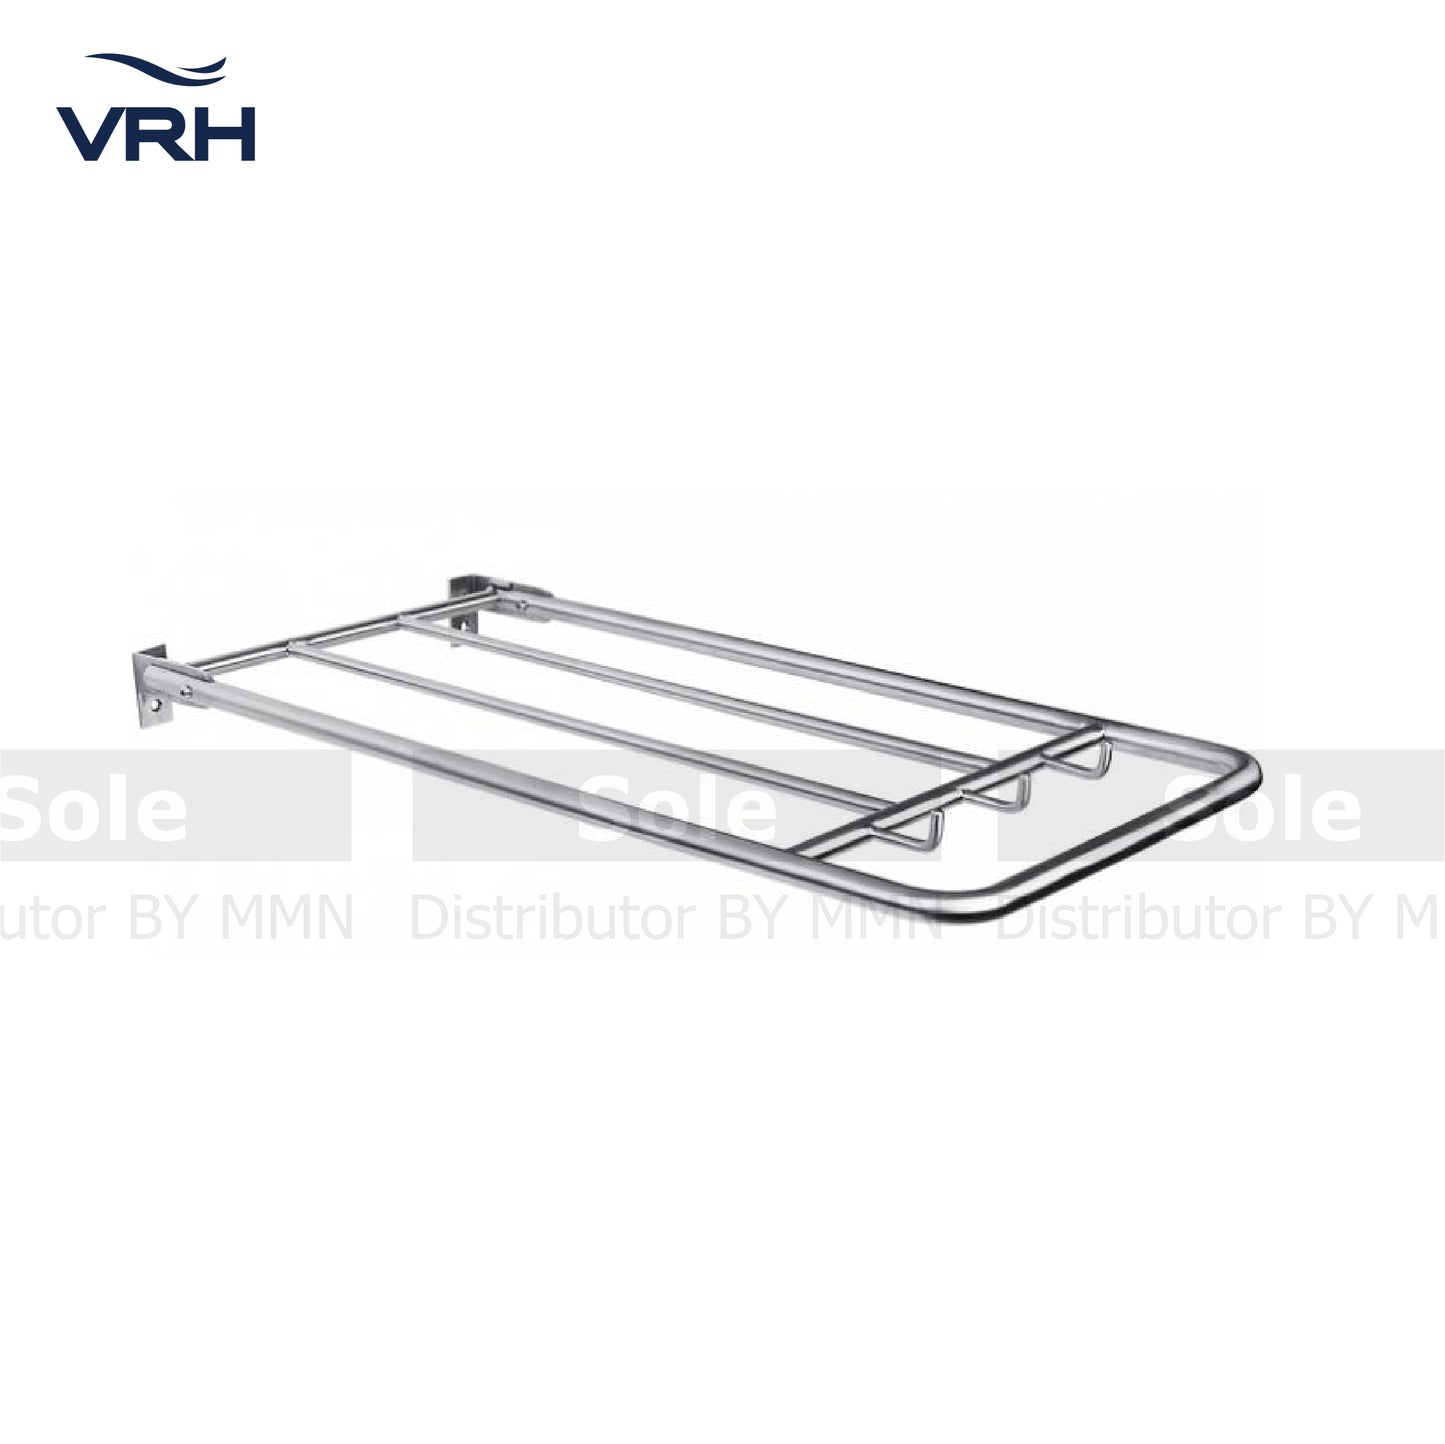 VRH Foldable Cloth Rack, Size 600x300mm, Stainless Steel - FBVHS.0131AS